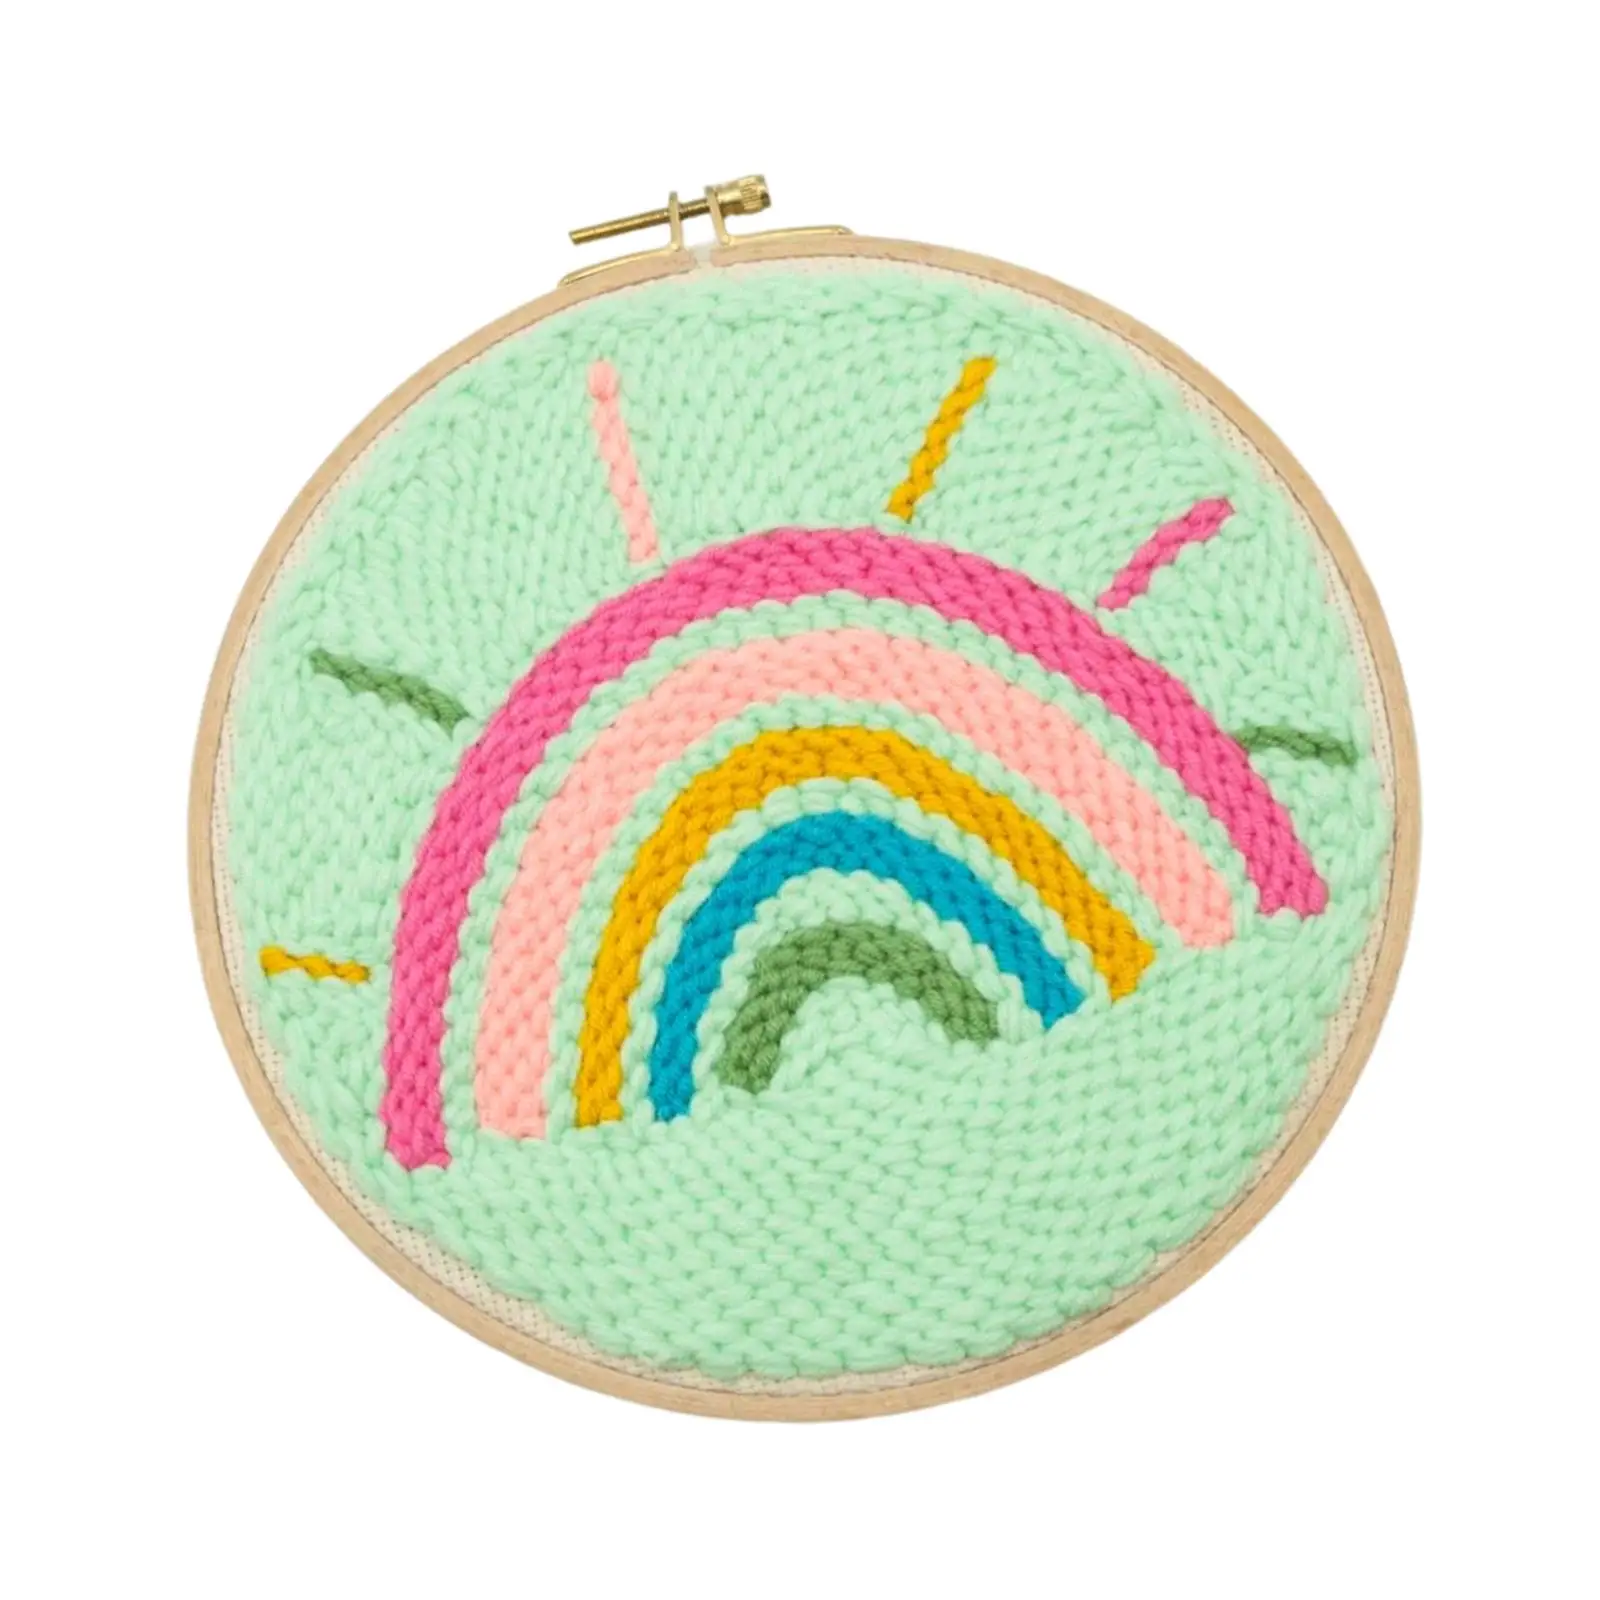 Punch Needle Embroidery Starter Kits Rainbow Embroidery Hoop Instructions Sewing Needlework Fabric Pattern Hand Craft Beginner